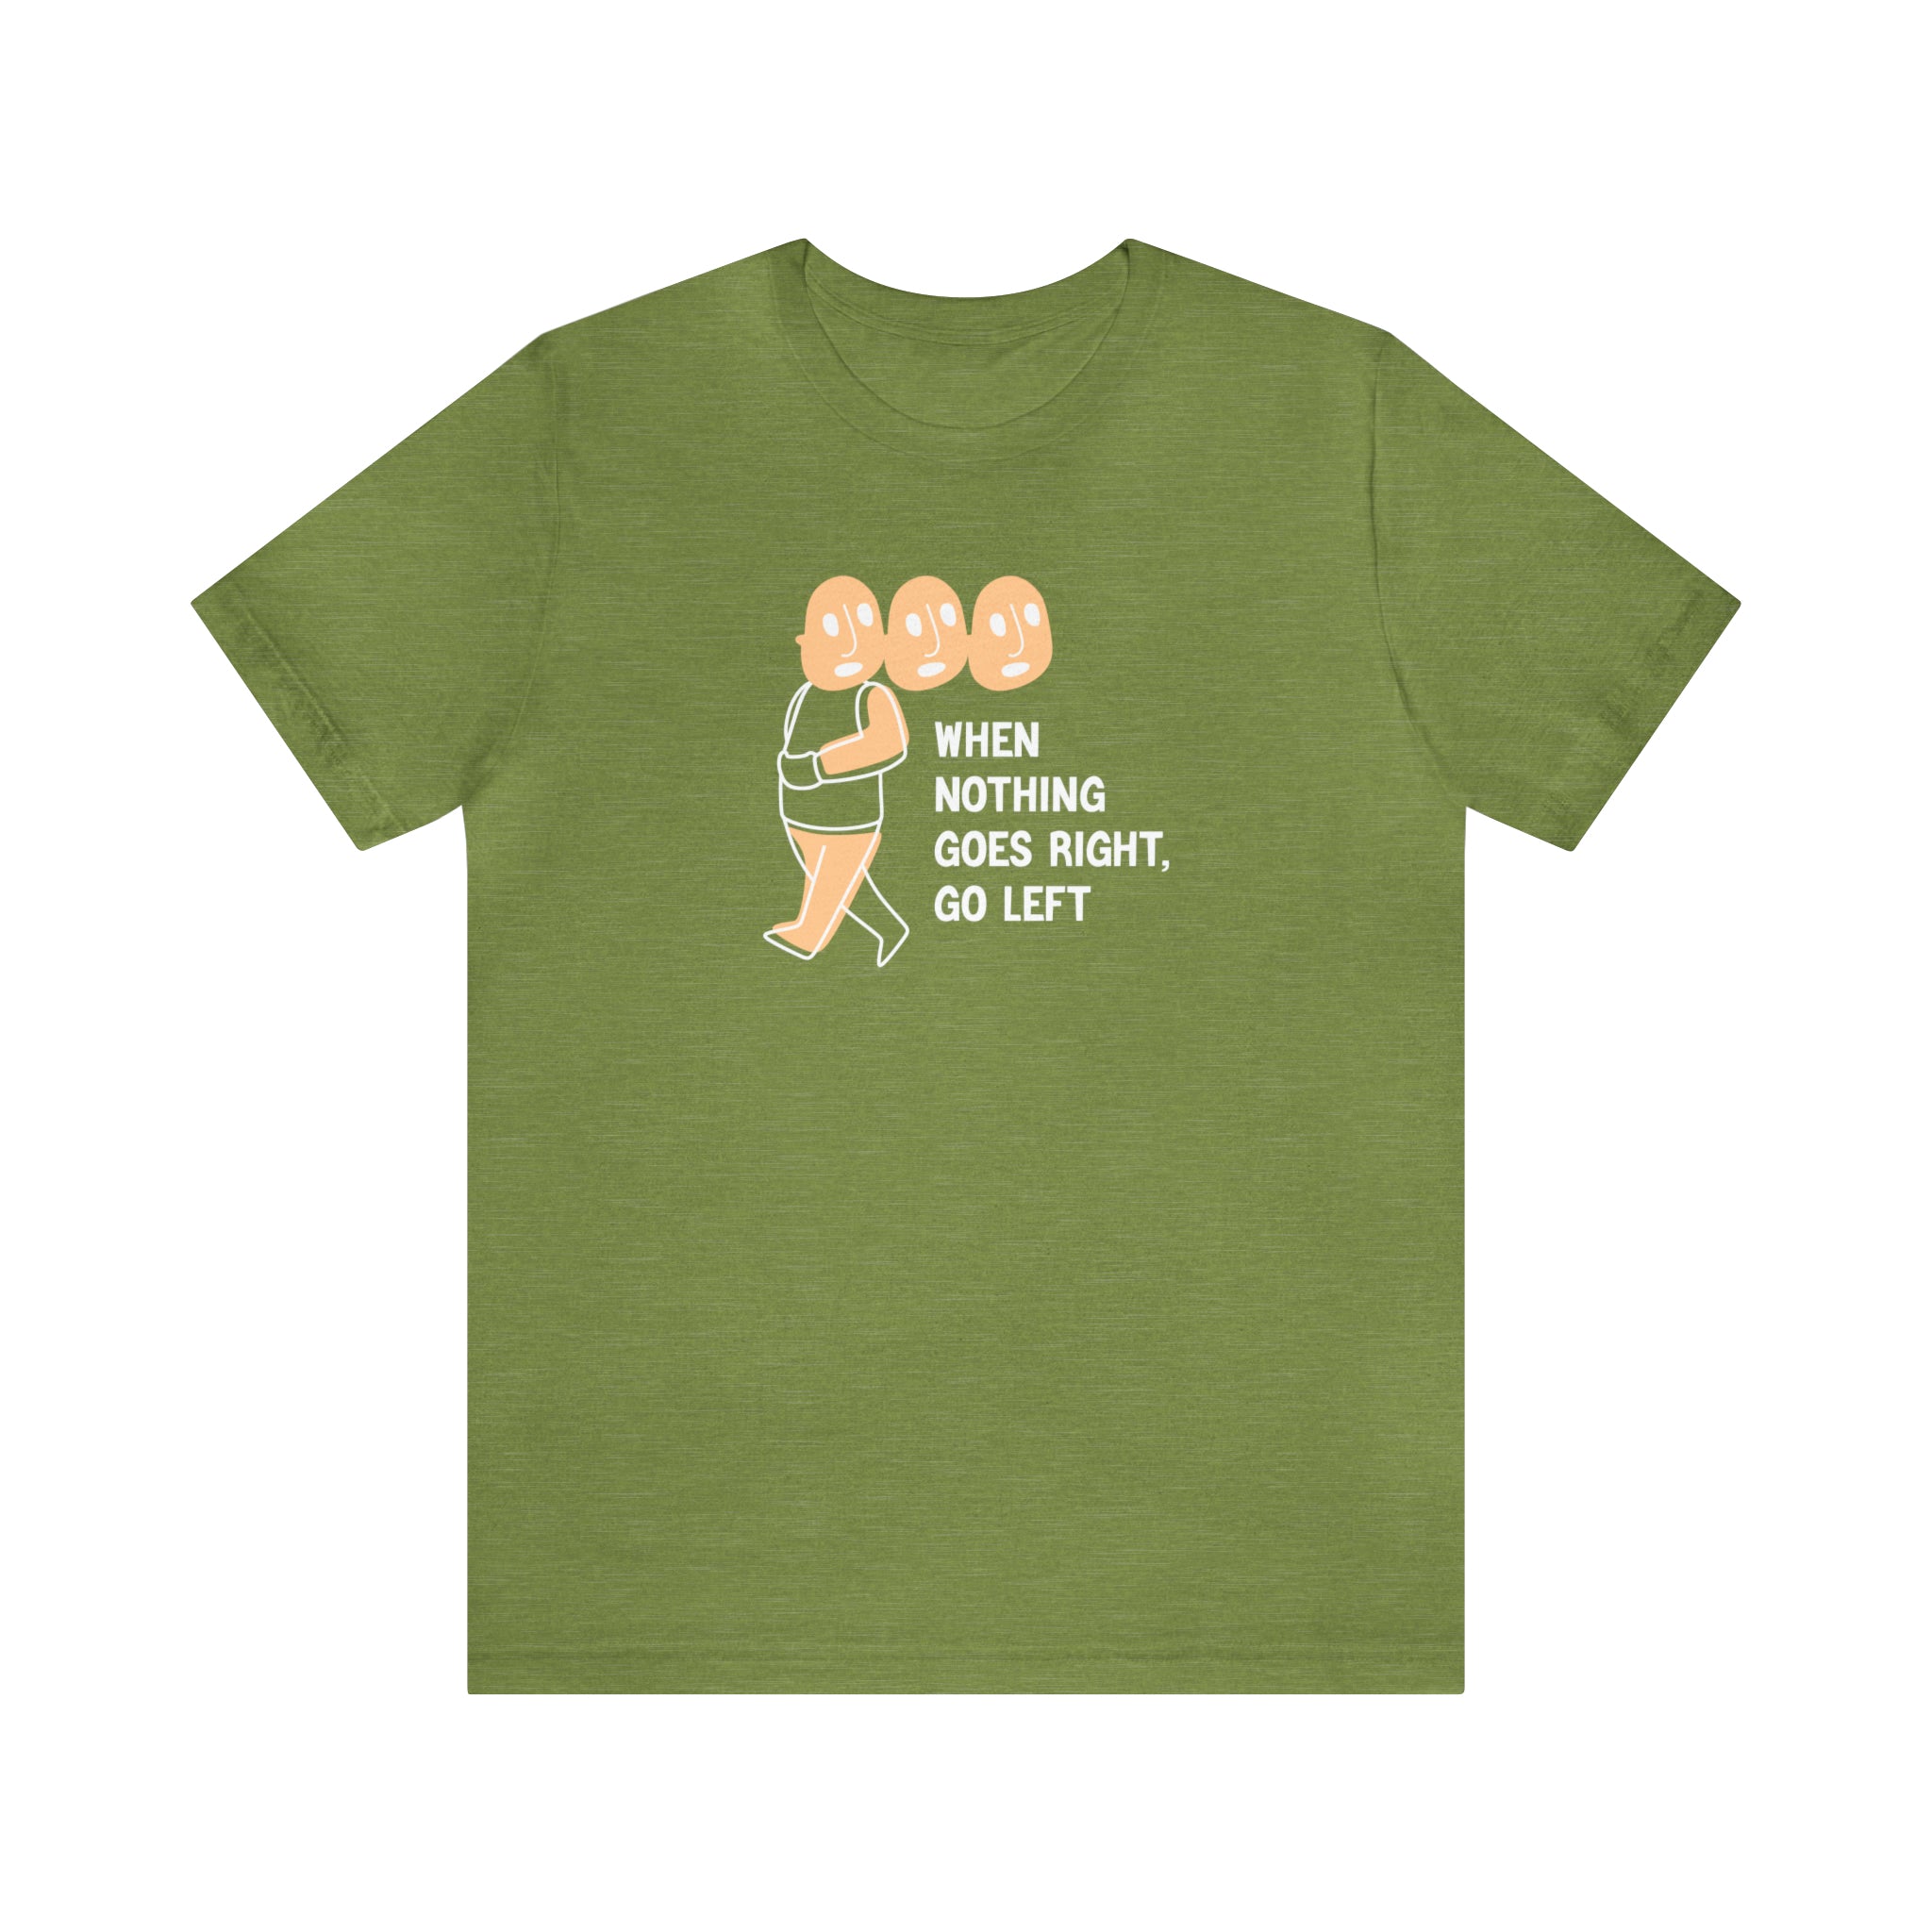 An ultra-soft green When Nothing Goes Right Go Left T-Shirt with an image of a woman holding a baby.